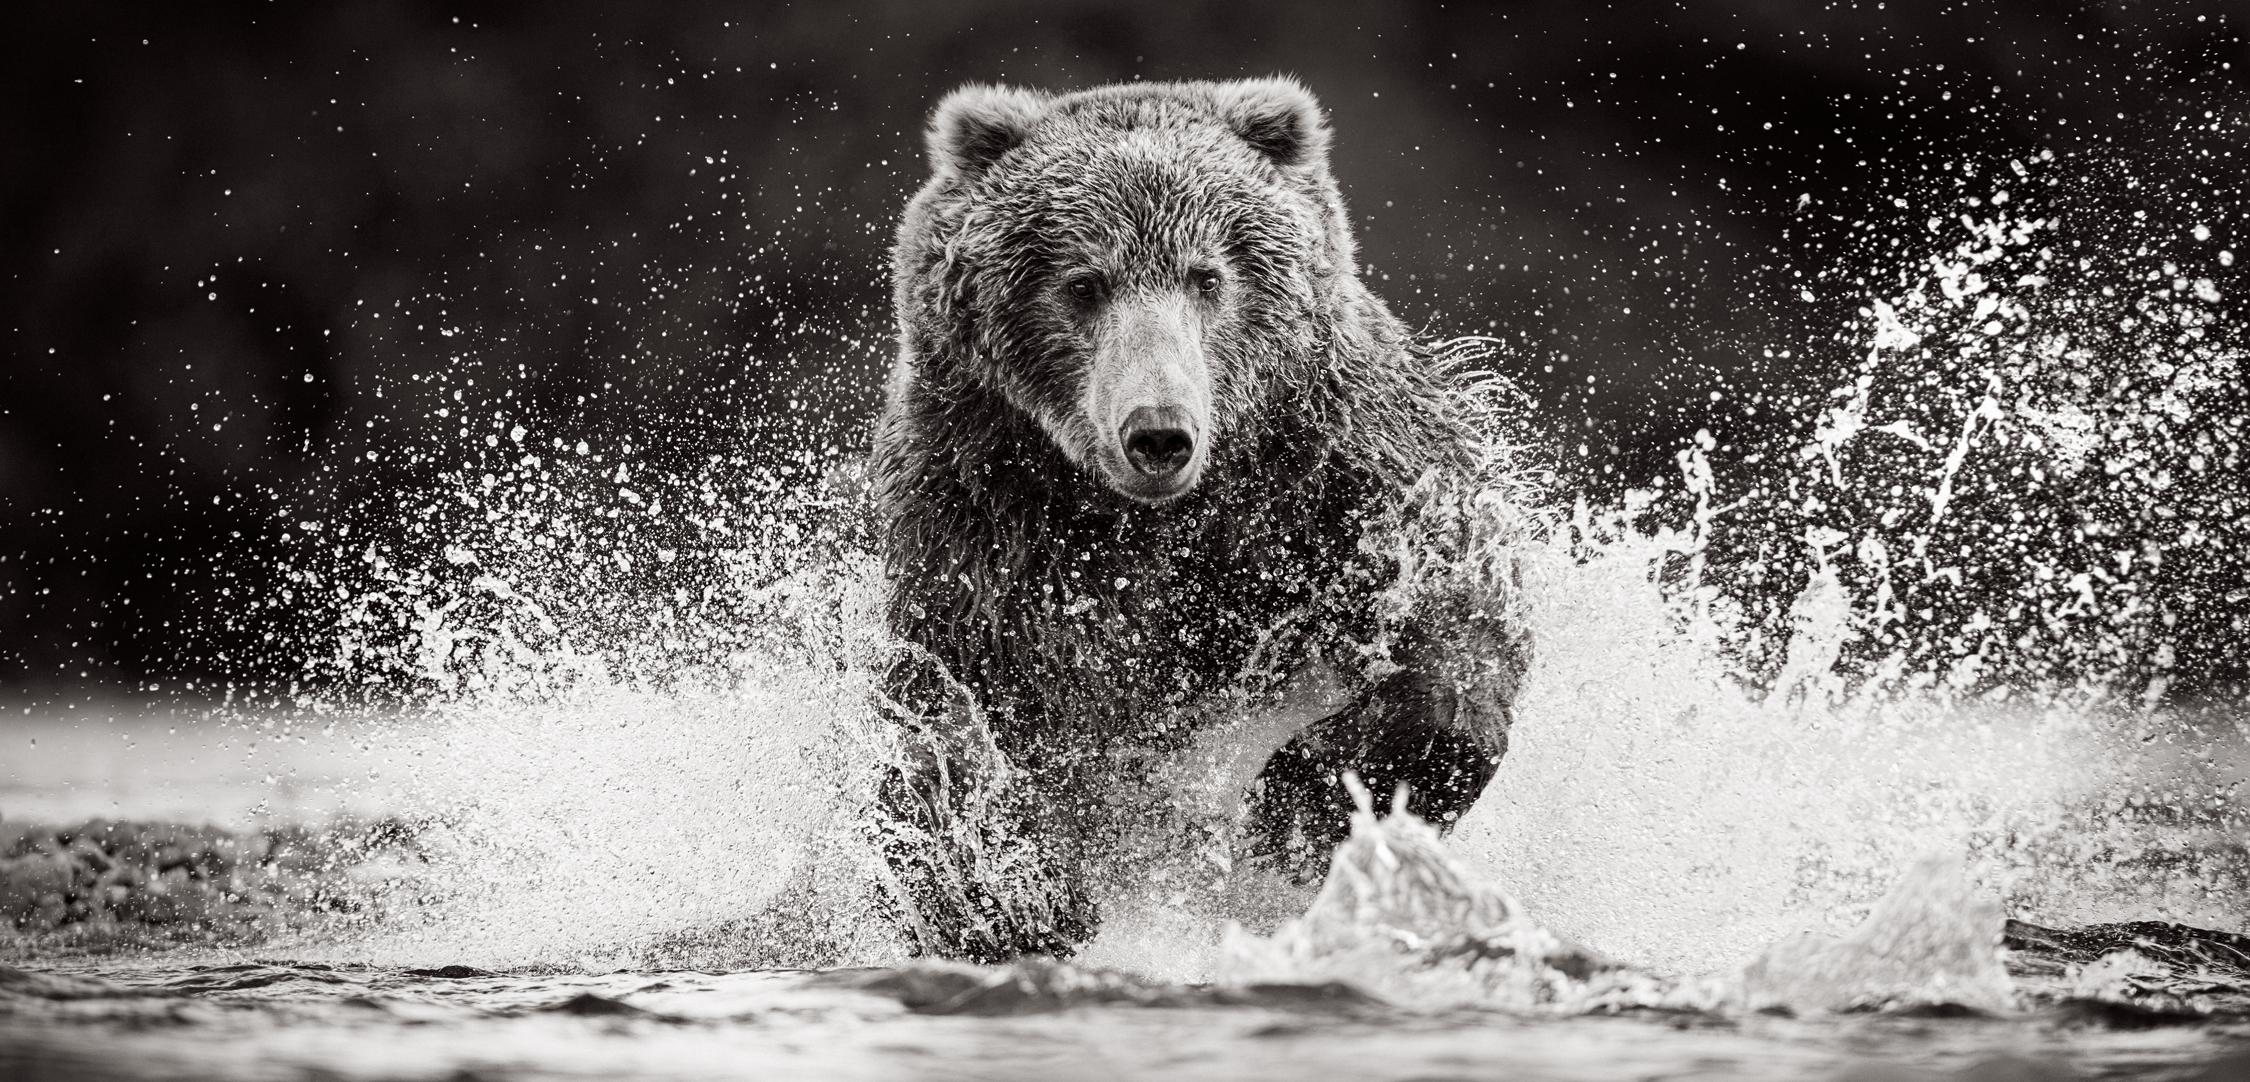 Drew Doggett Black and White Photograph - Brown Bear Charges Through Water